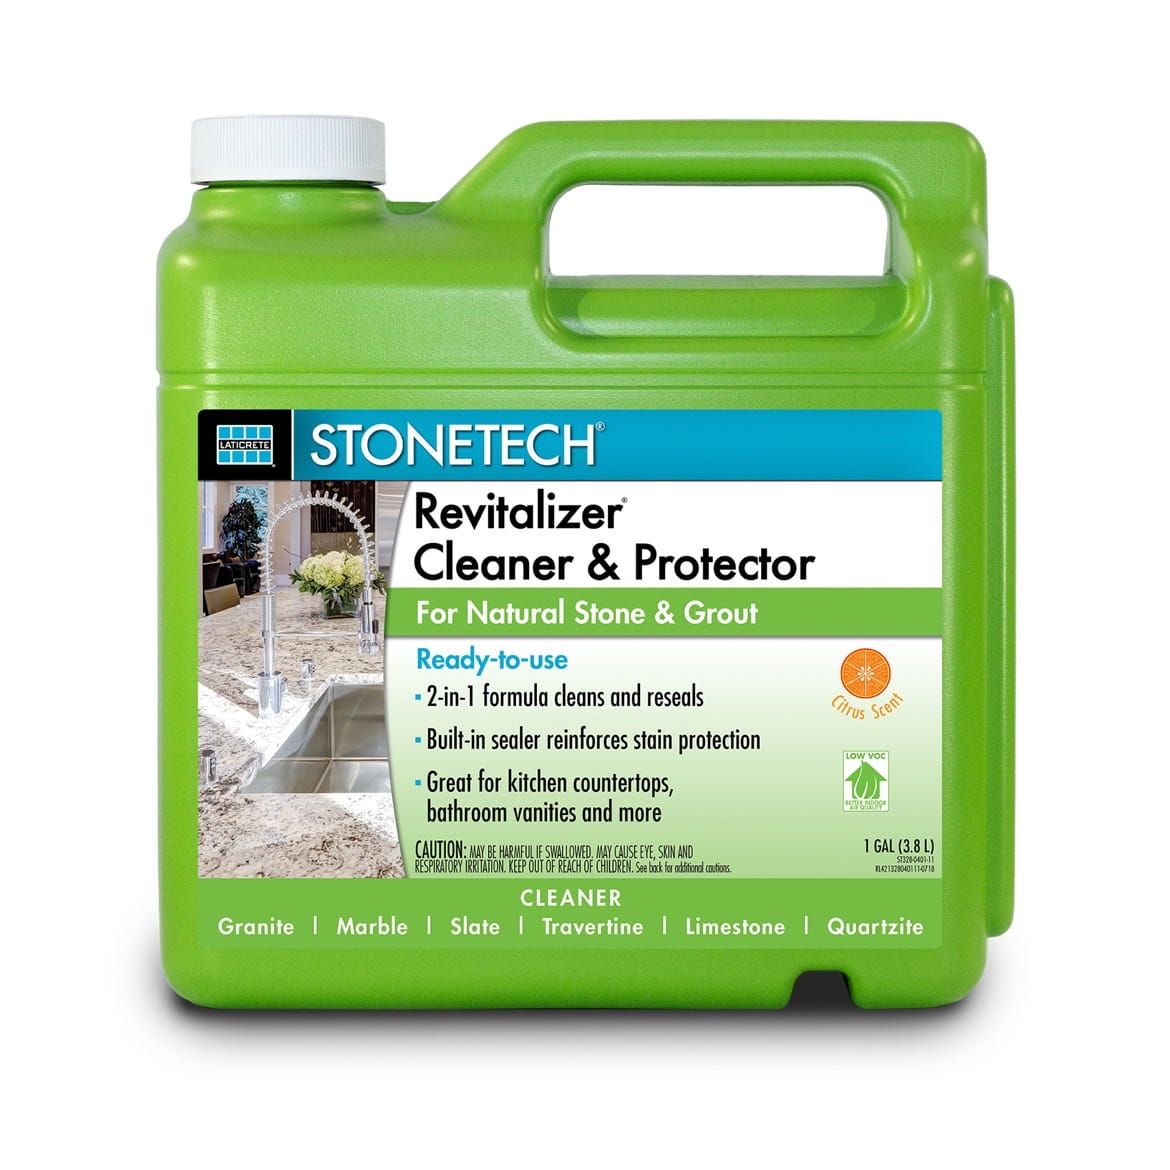 Stonetech revitalizer cleaner and protector